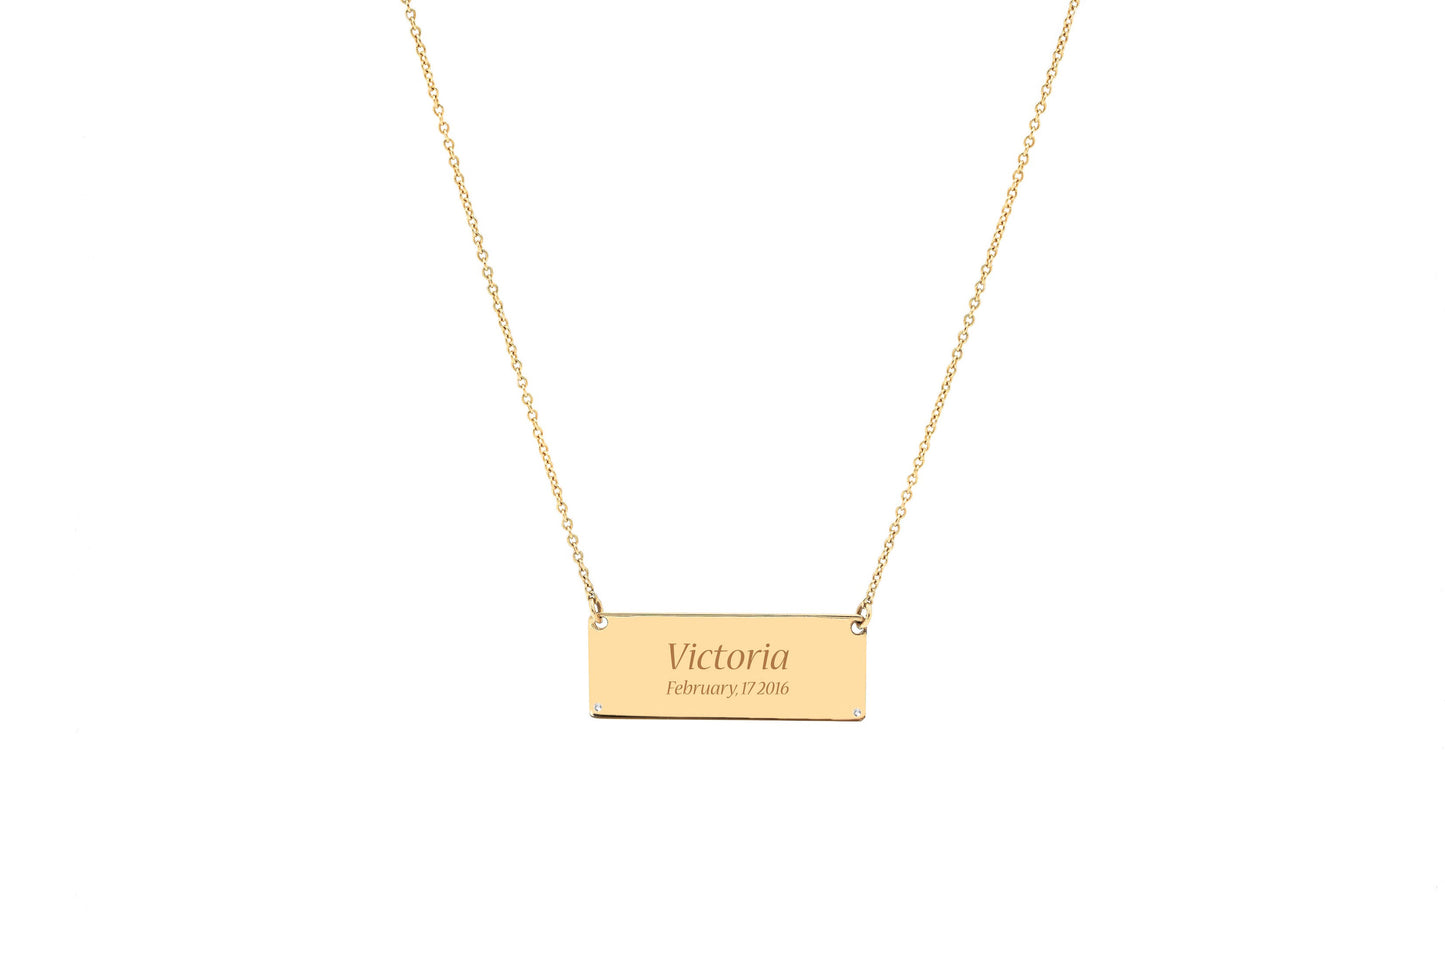 Handprints / Footprints Small Bar Necklace in 14K Gold with Diamonds